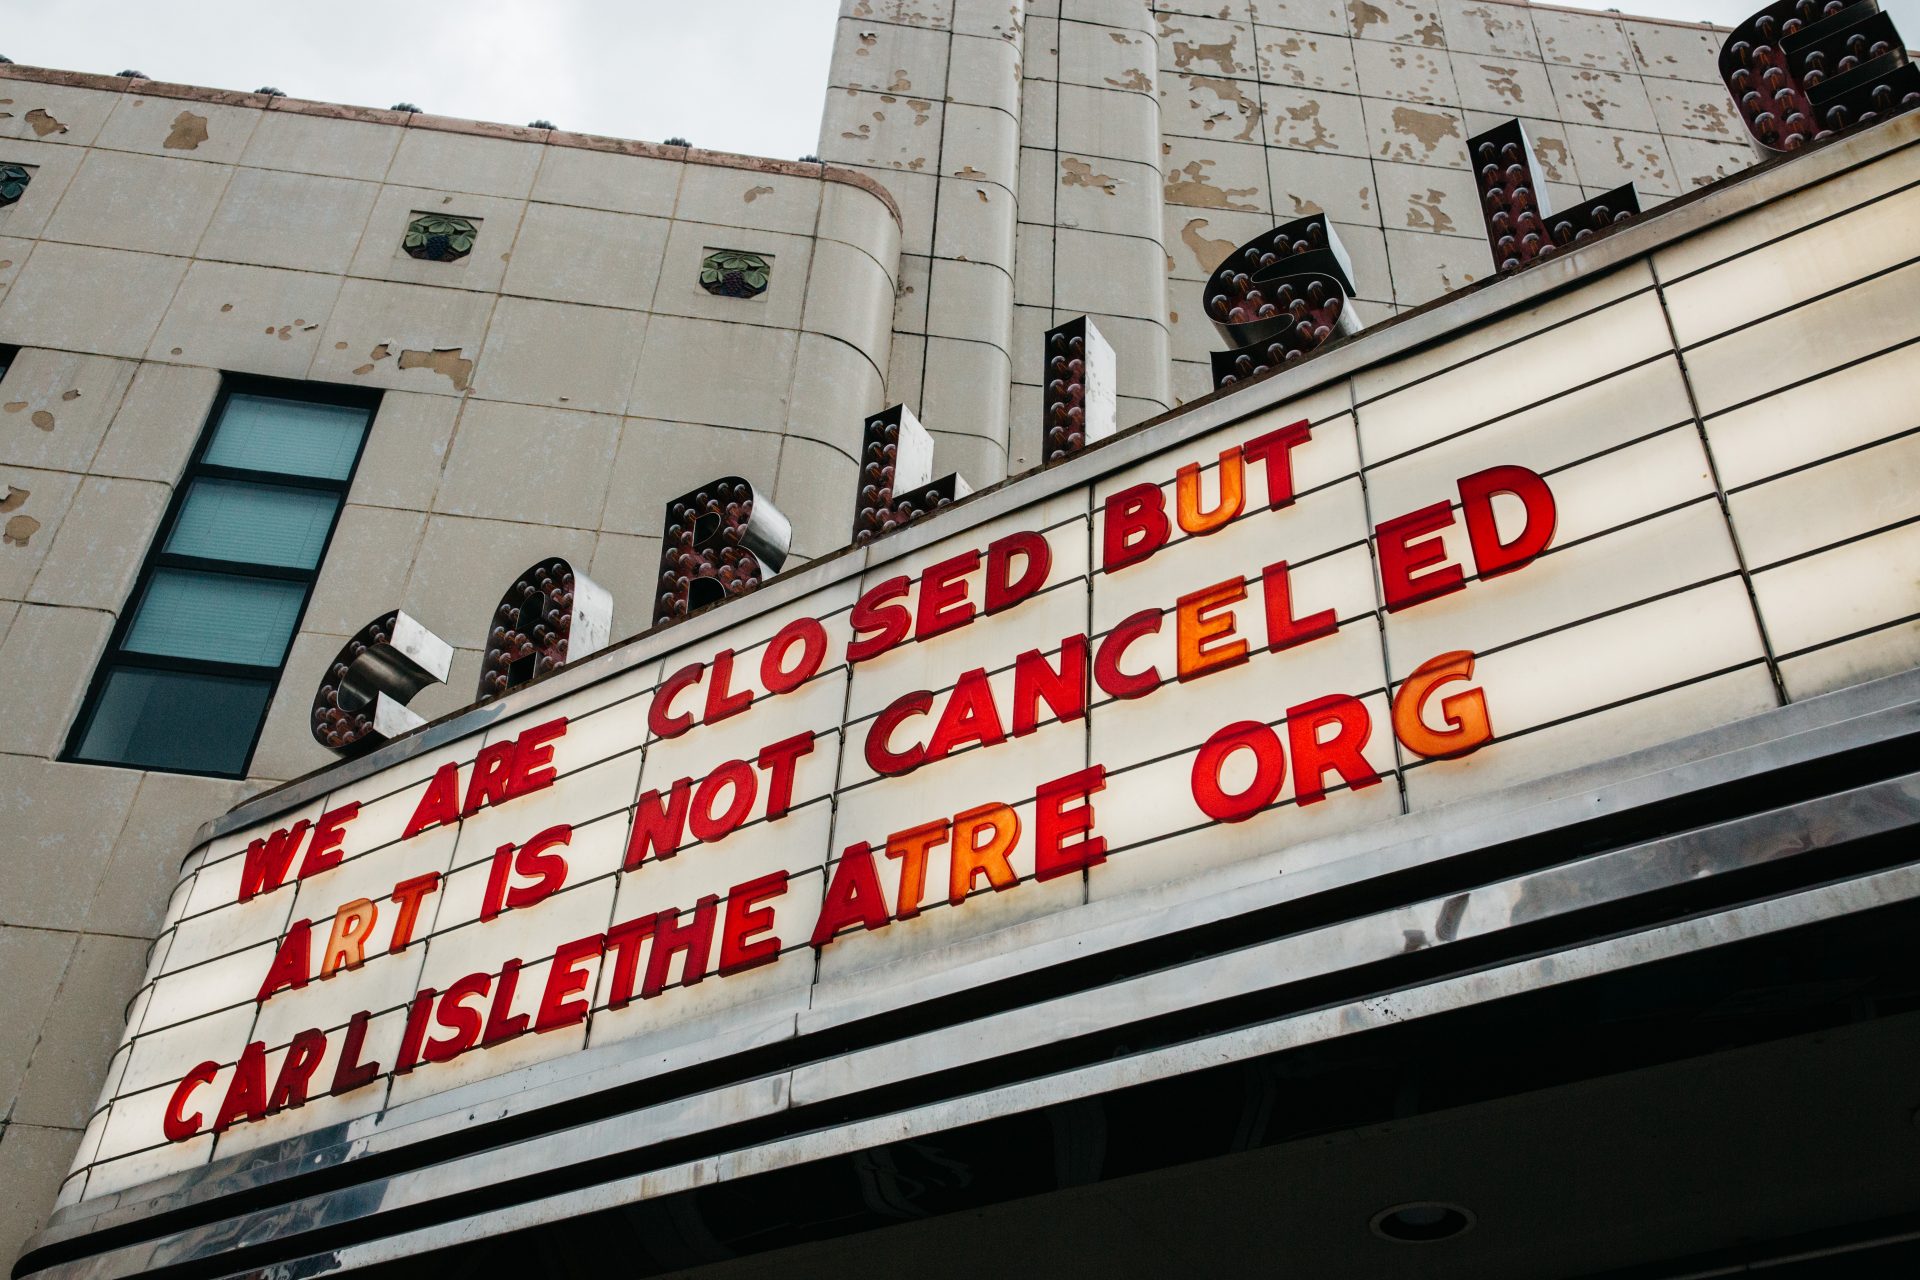 The Carlisle Theatre, seen in this April 27 photo, closed amid the coronavirus pandemic. 